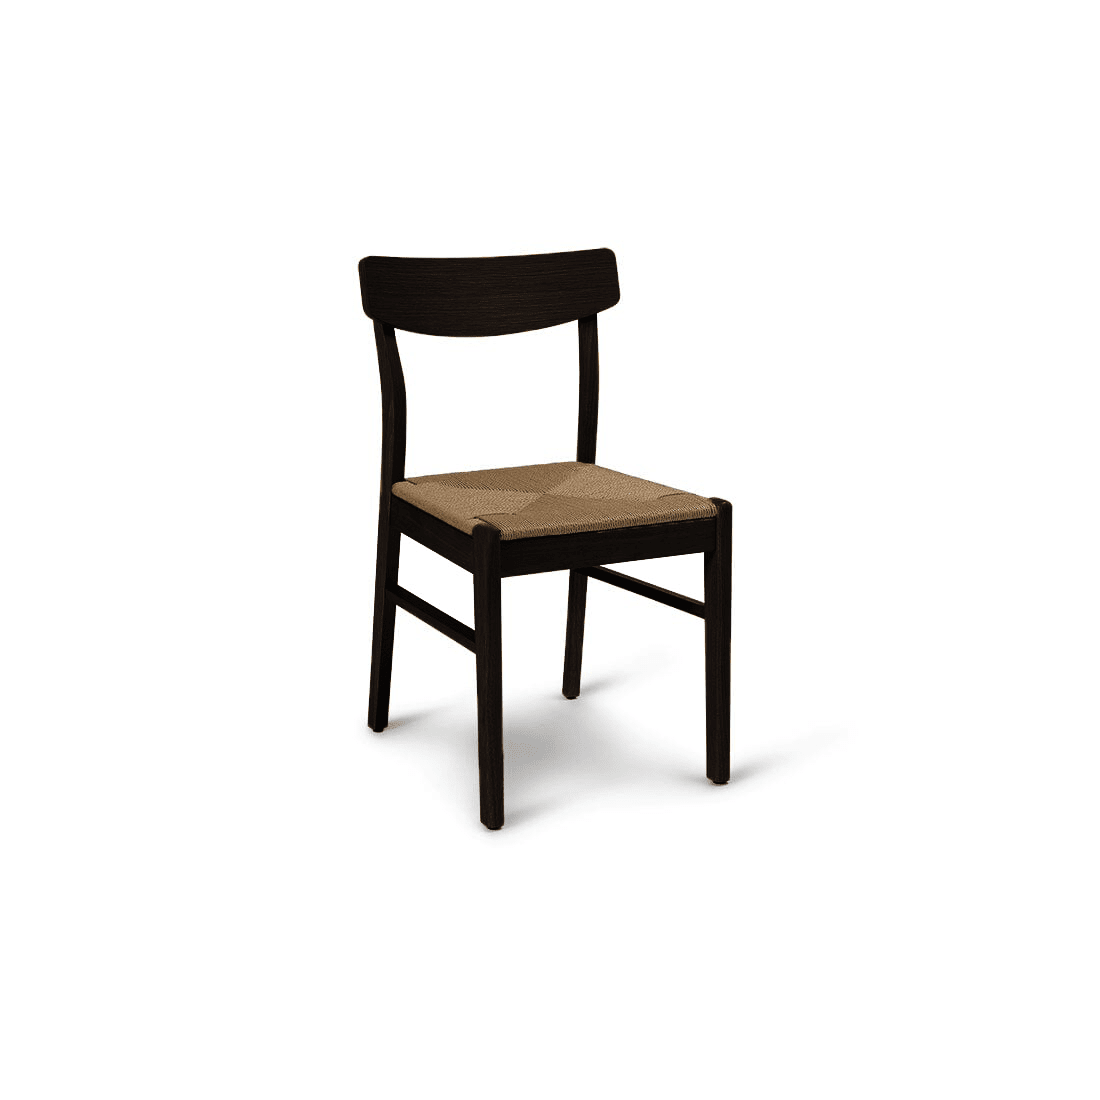 Wooden Woven Chairs Set 2 - Black - Laura James